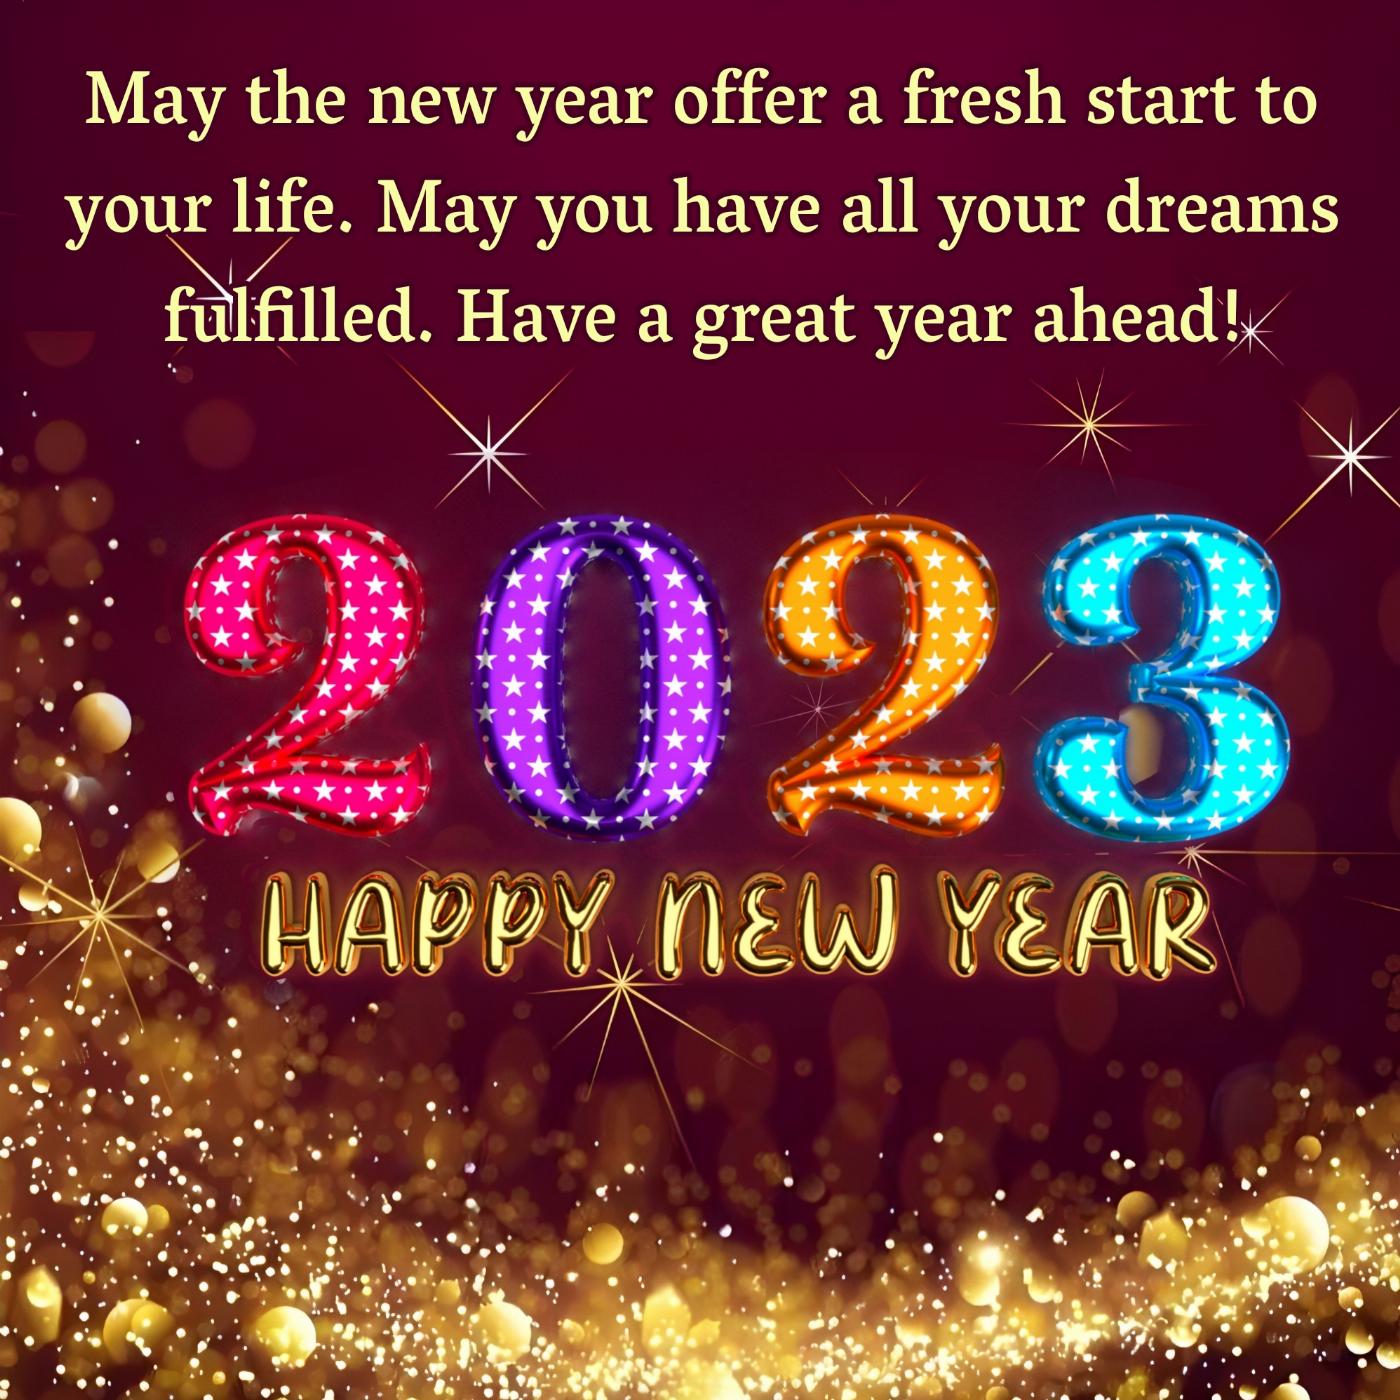 May the new year offer a fresh start to your life